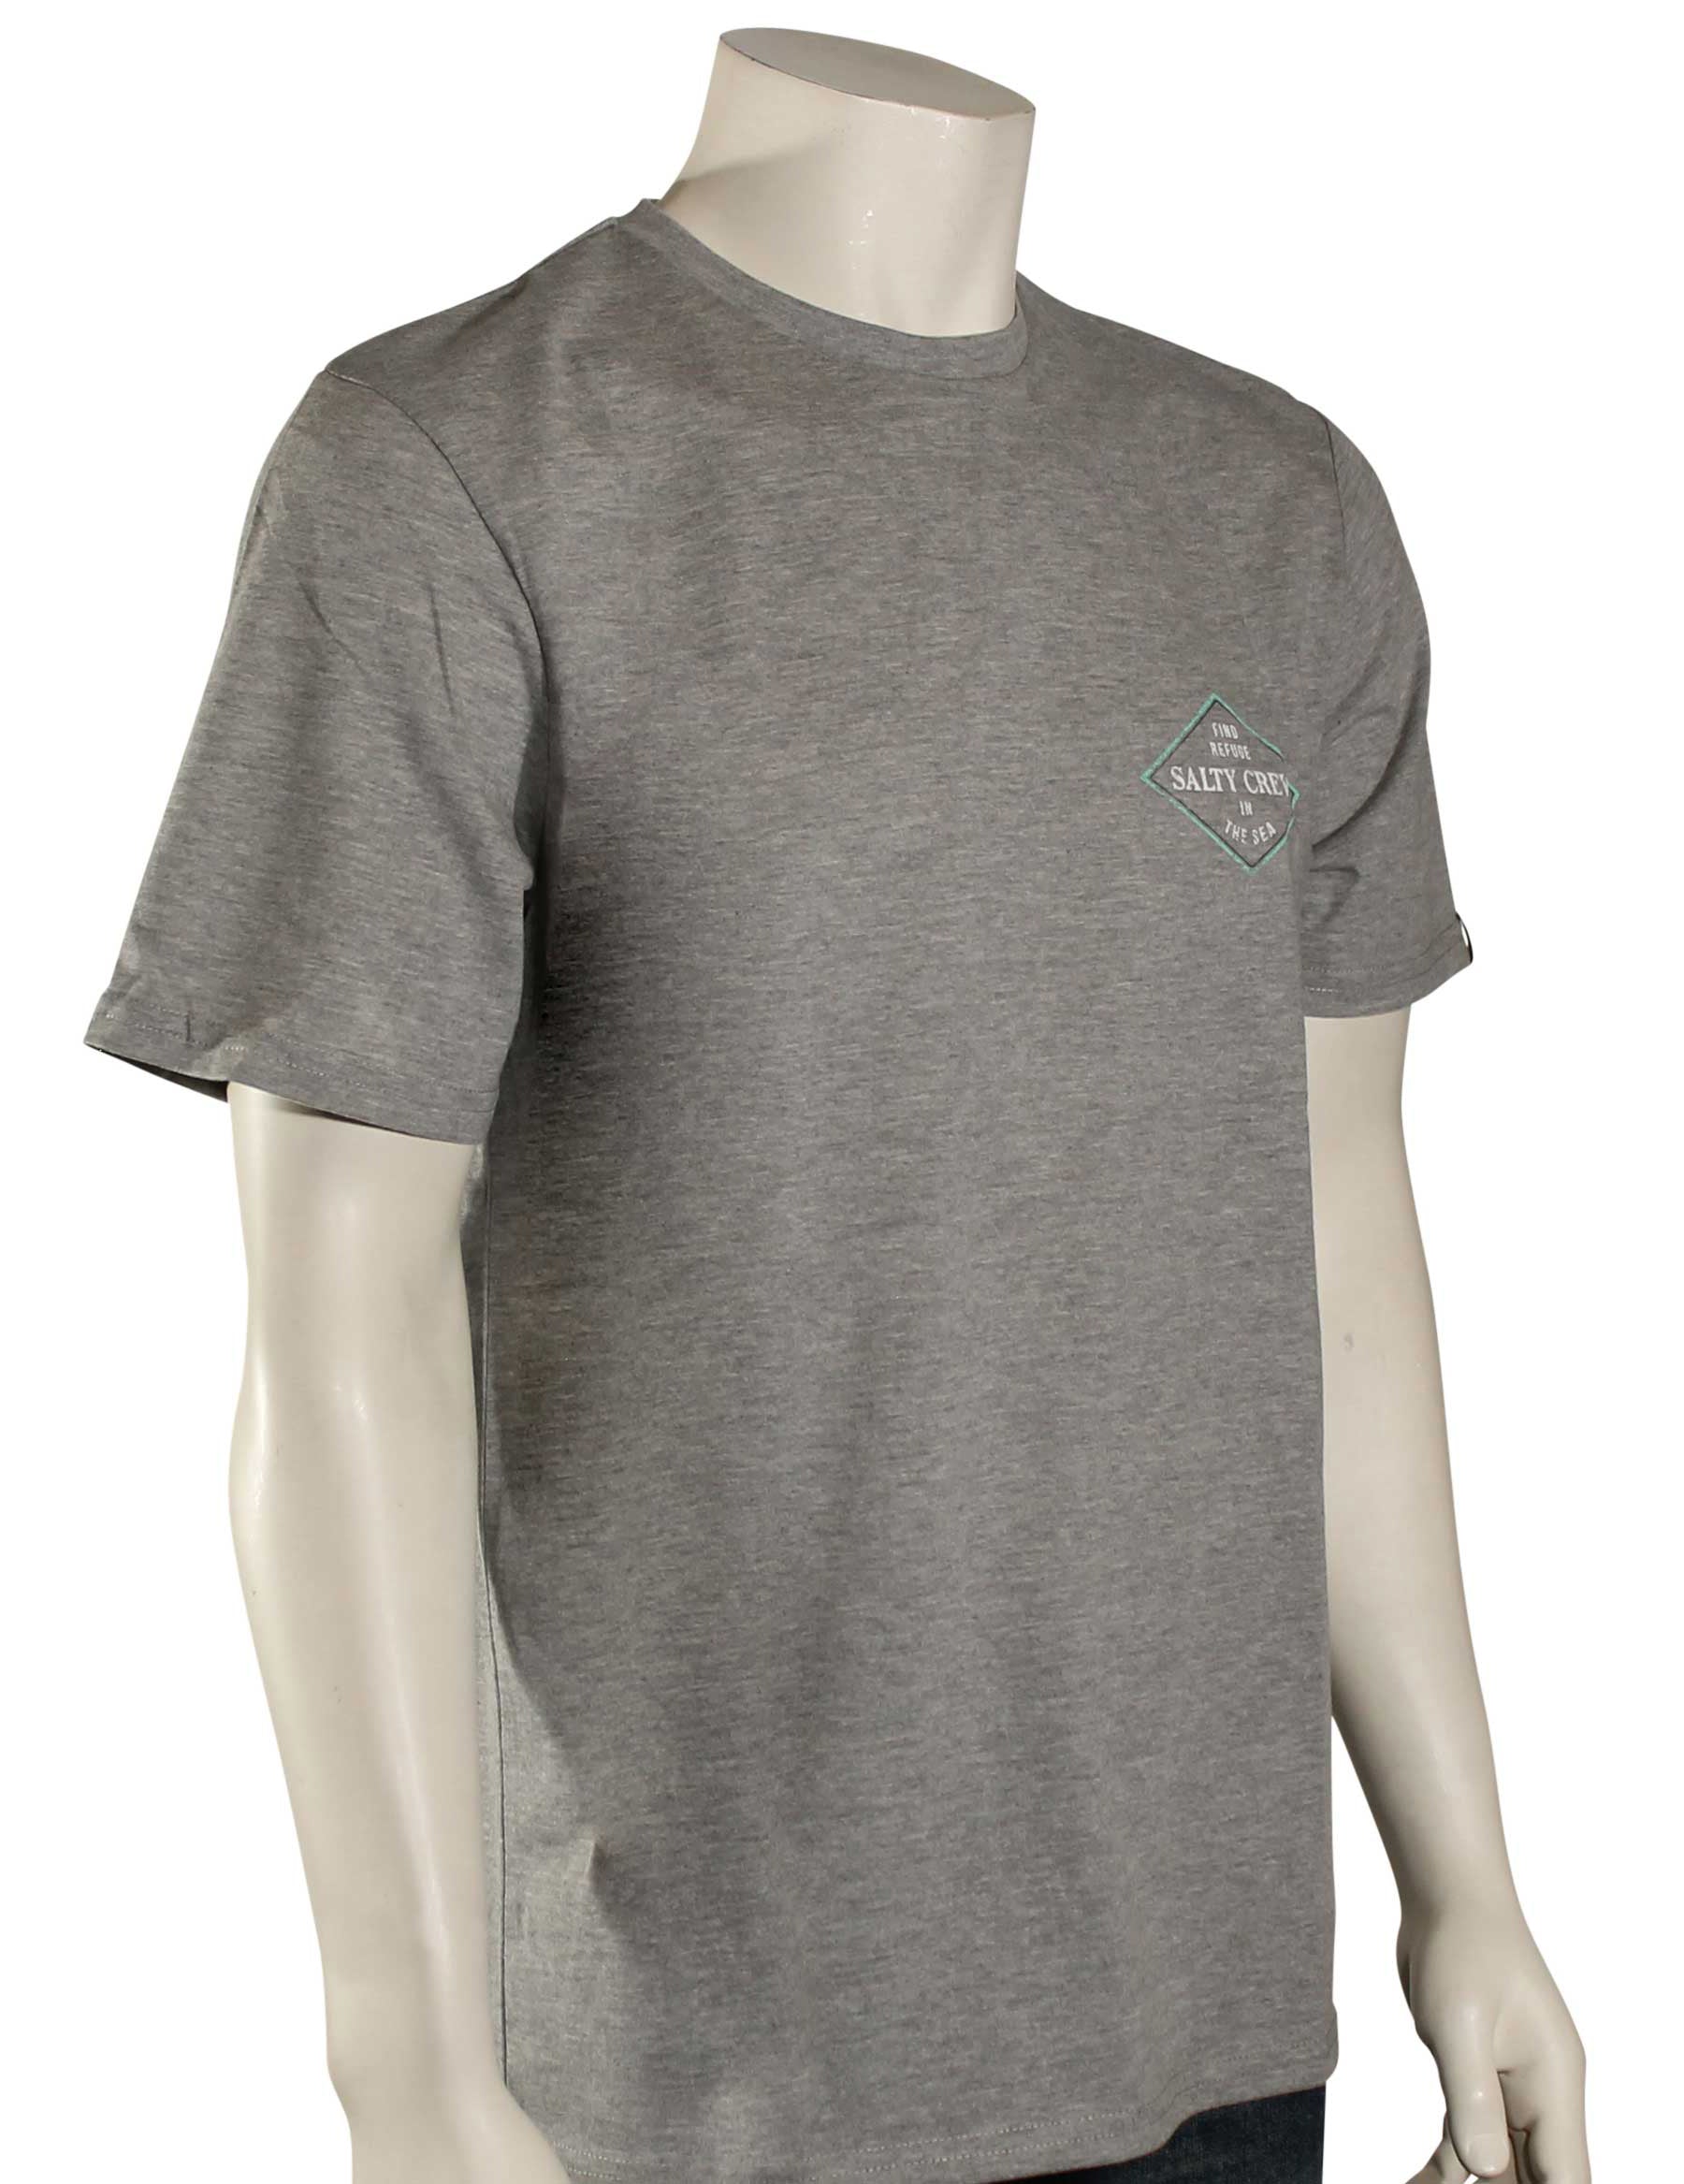 Salty Crew Four Corners SS Tech Tee AthleticHeather L